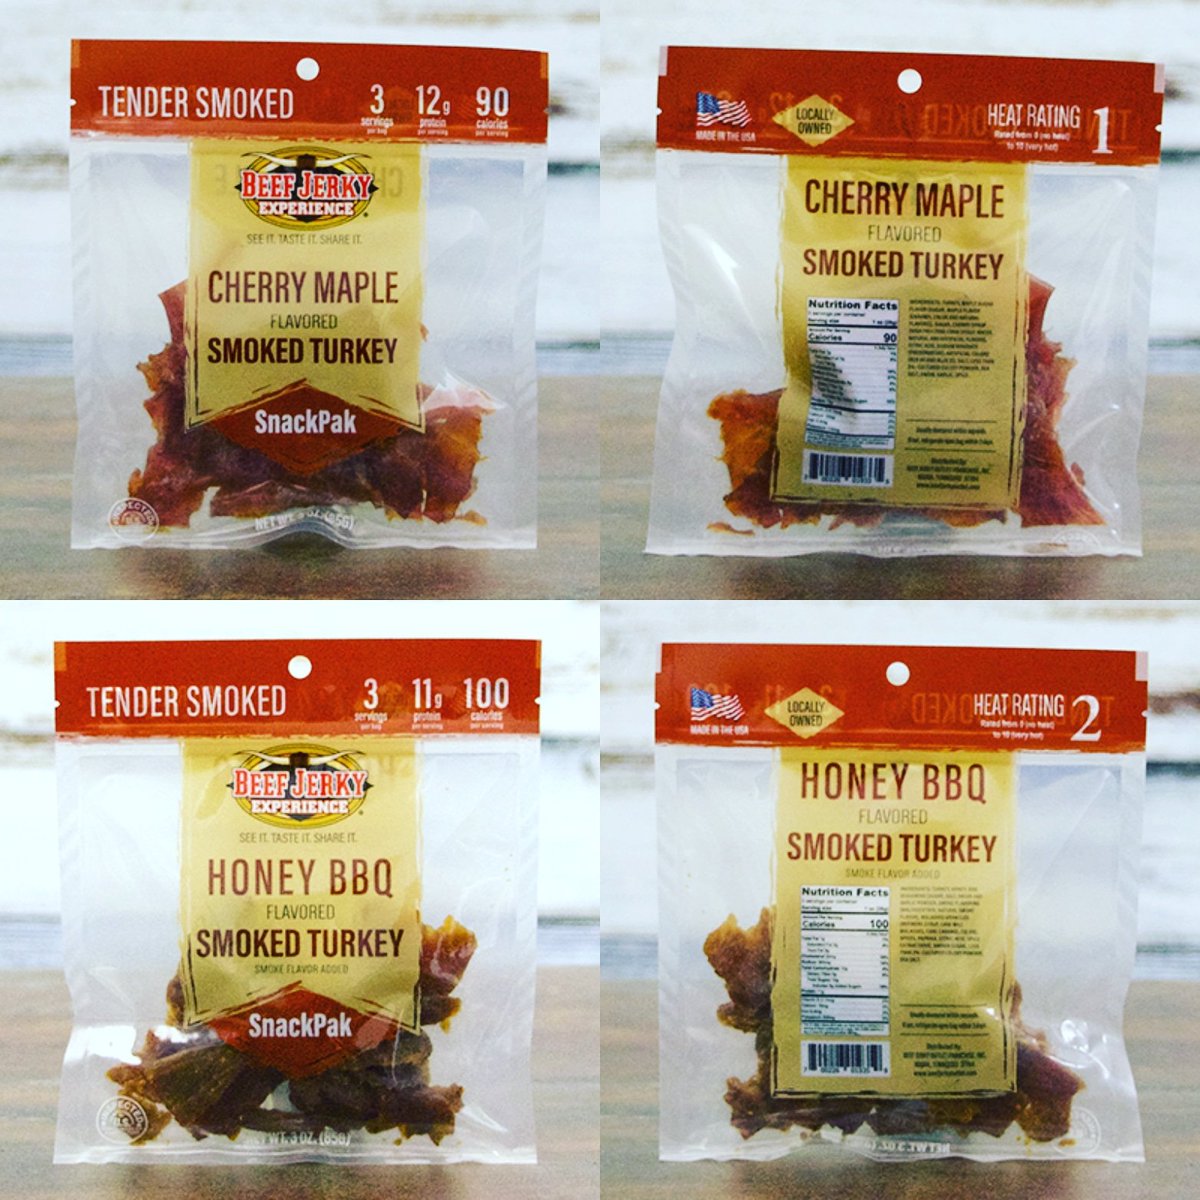 Making healthier choices and eating less red meat? We have alternatives to beef jerky at @bjopittsburgh including turkey...and even vegan jerky options! #yummy

#turkeyjerky #lessredmeat #bjopittsburgh #healthyeating #stripdistrict #rossparkmall #shoplocal